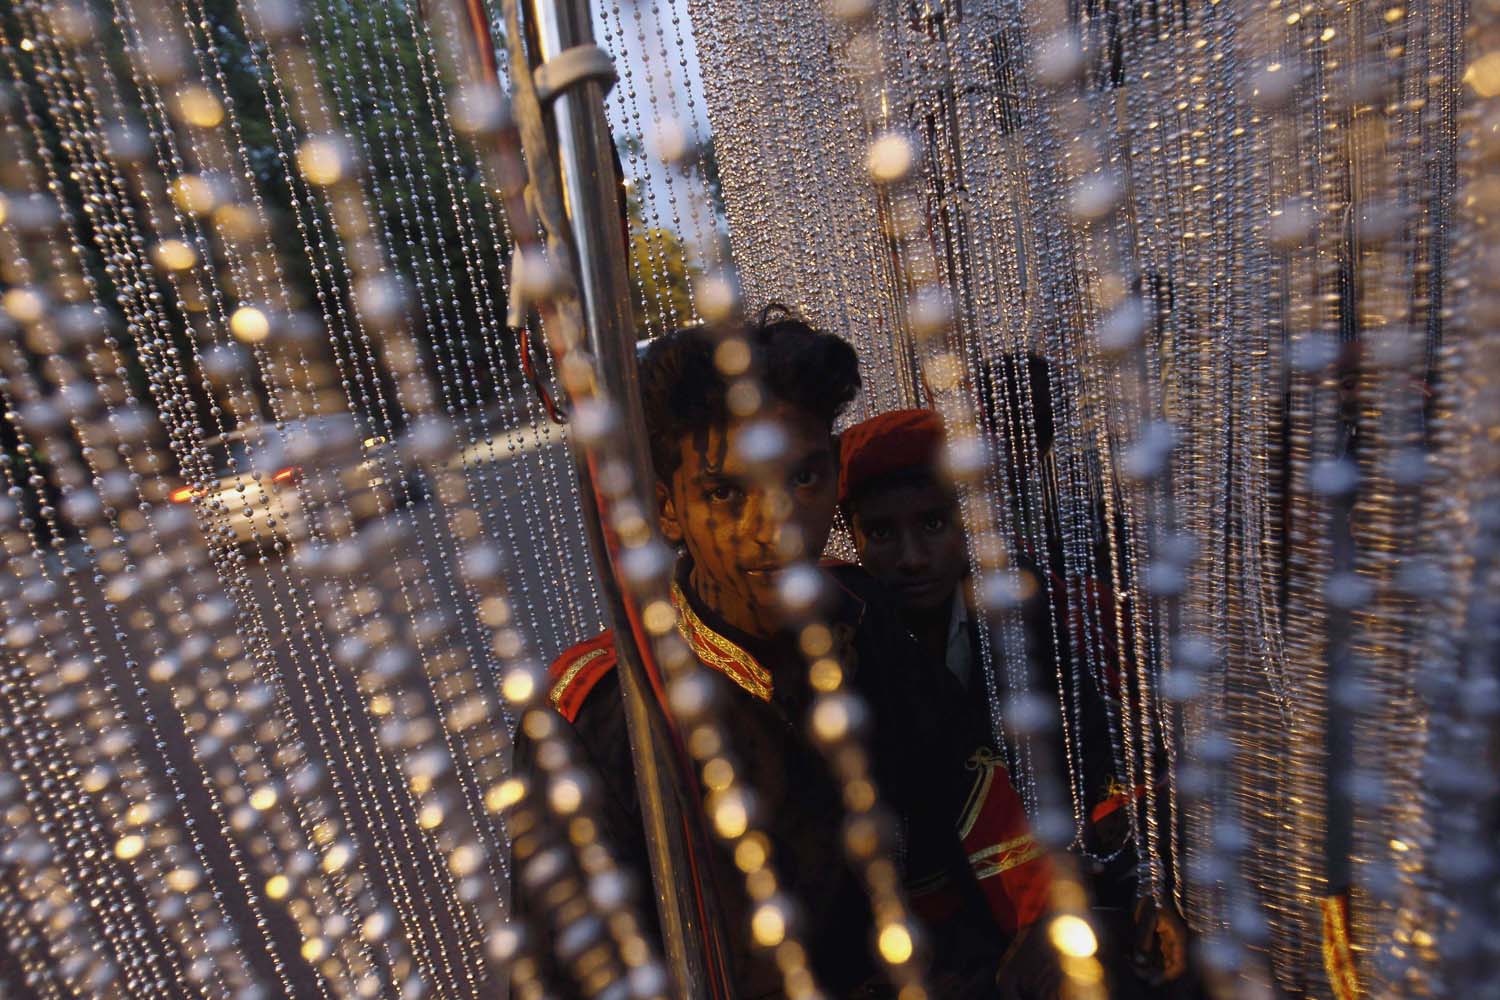 A band member carries a light prior to a wedding procession in New Delhi